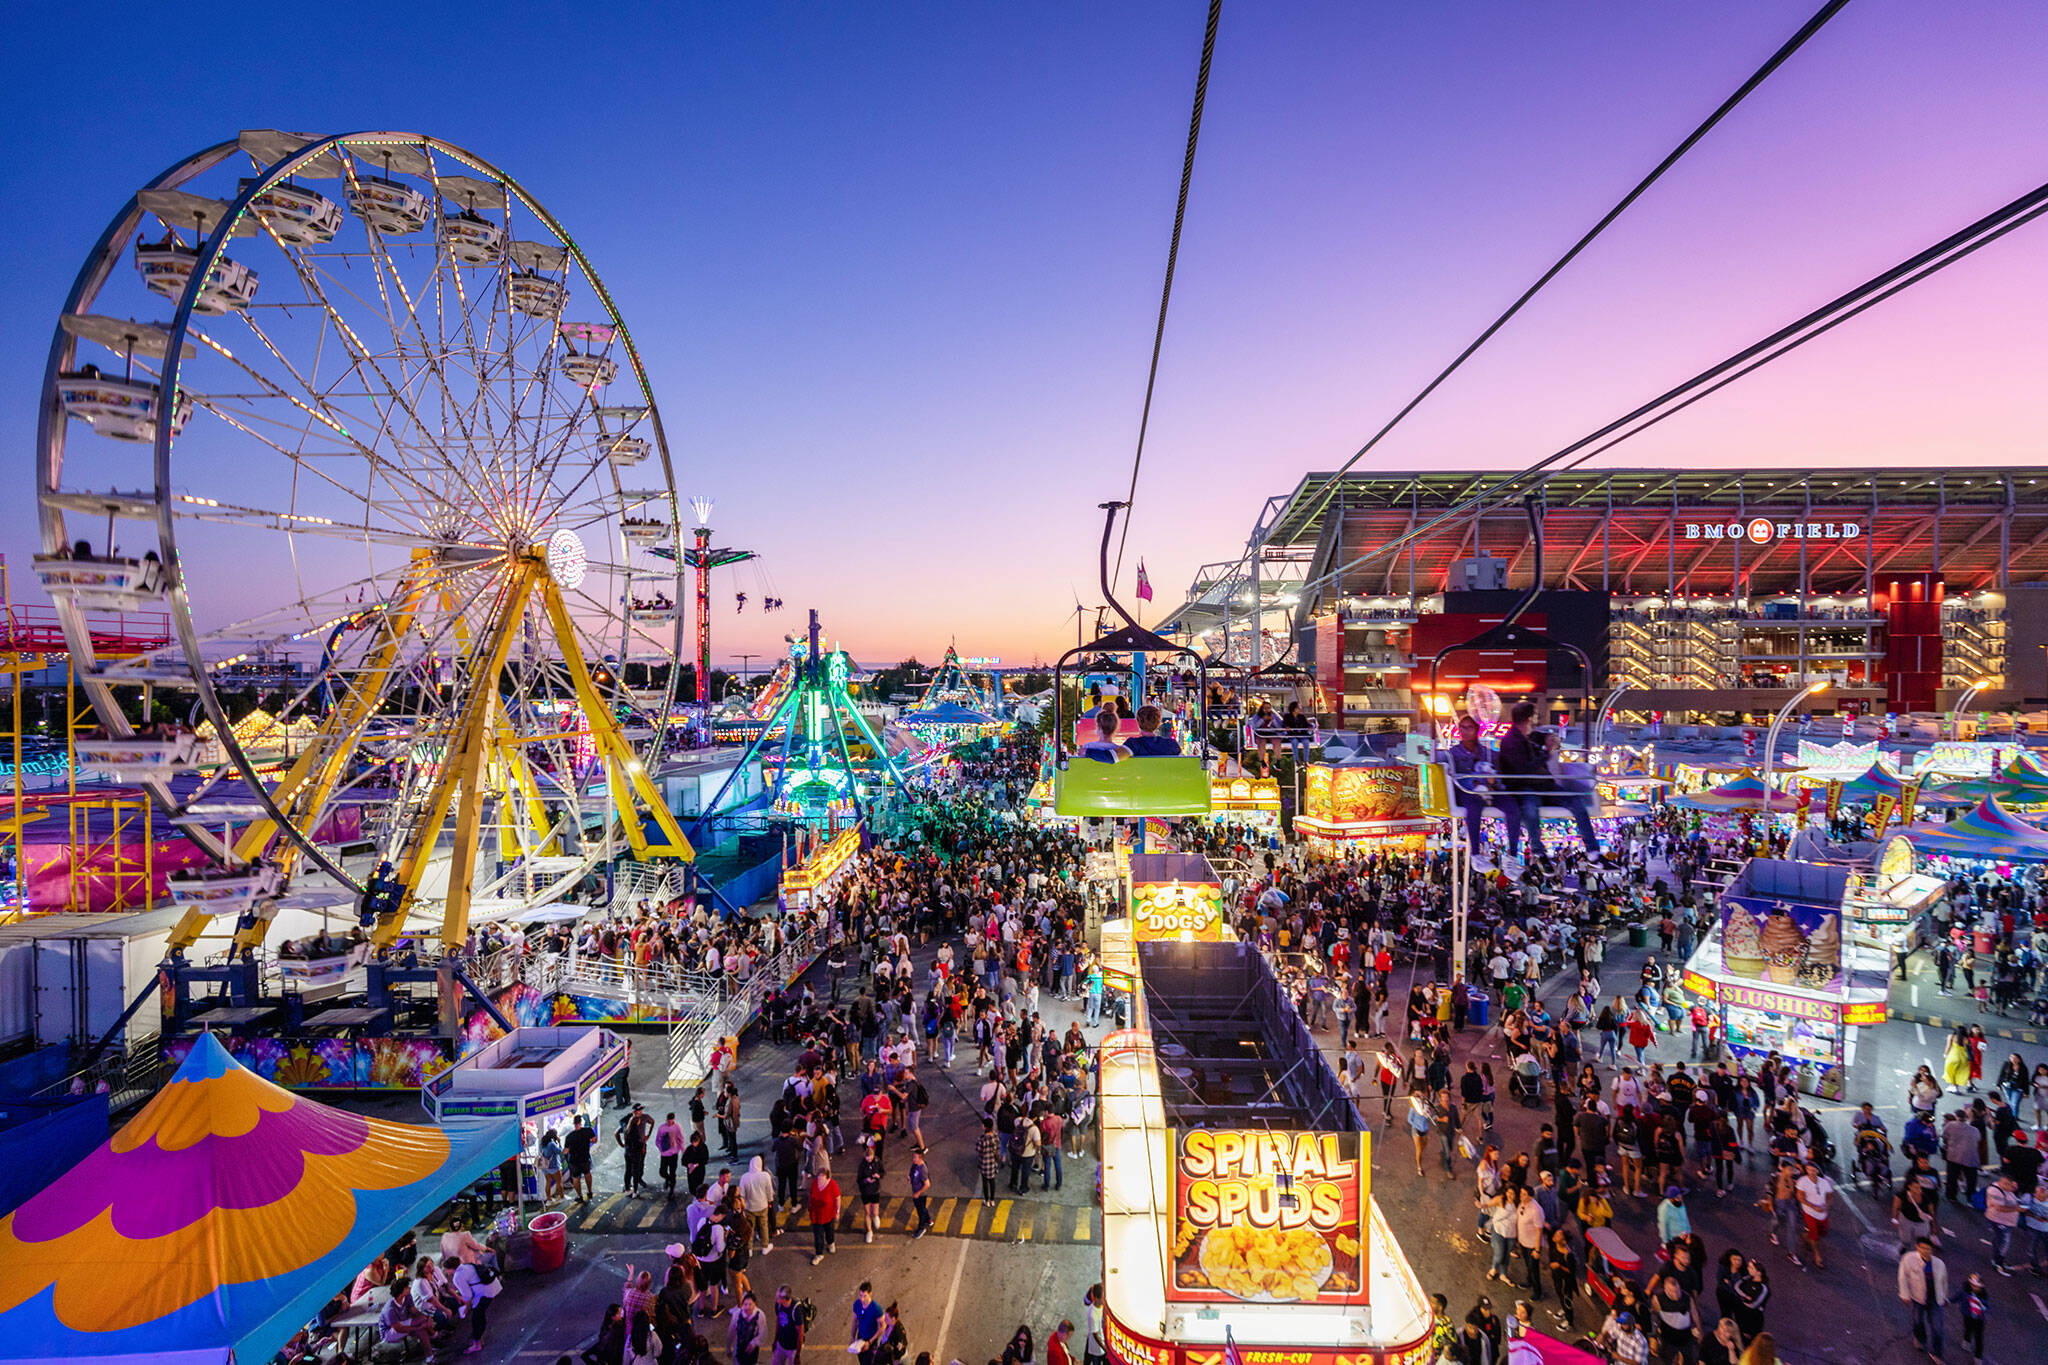 Here are the best ways to beat Toronto traffic and crowds at the CNE in